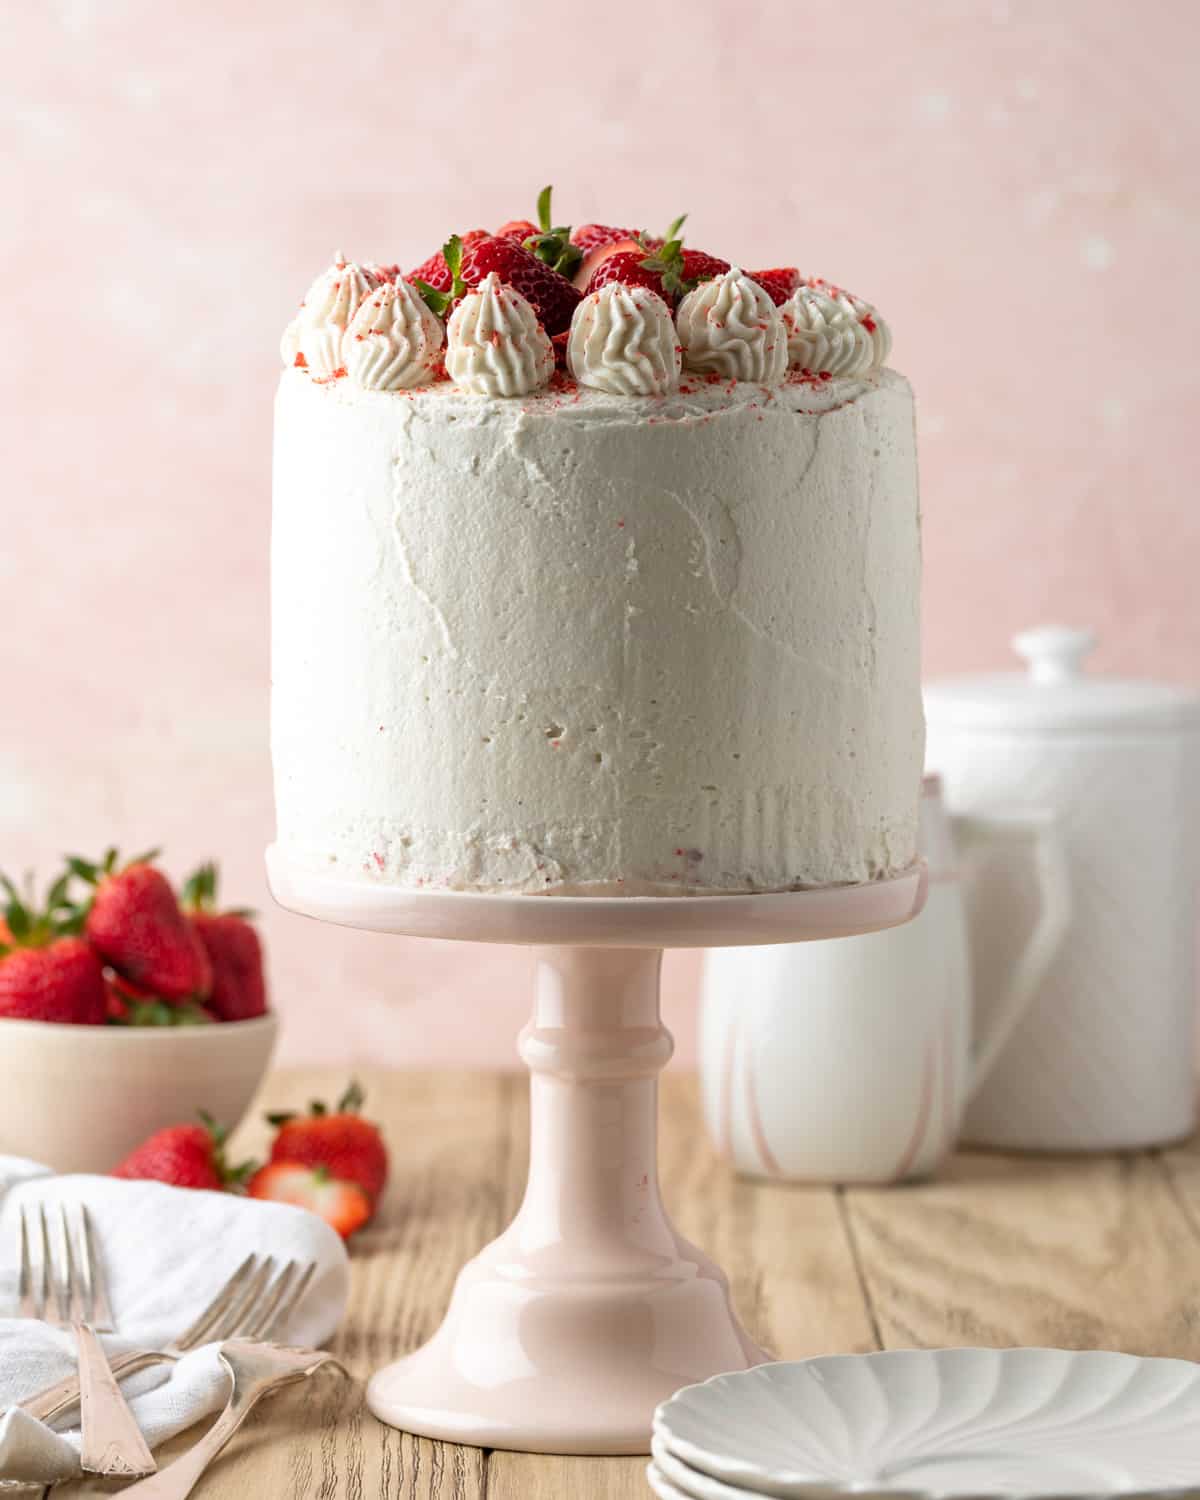 Gluten free strawberry cake covered with cream cheese frosting and fresh strawberries.